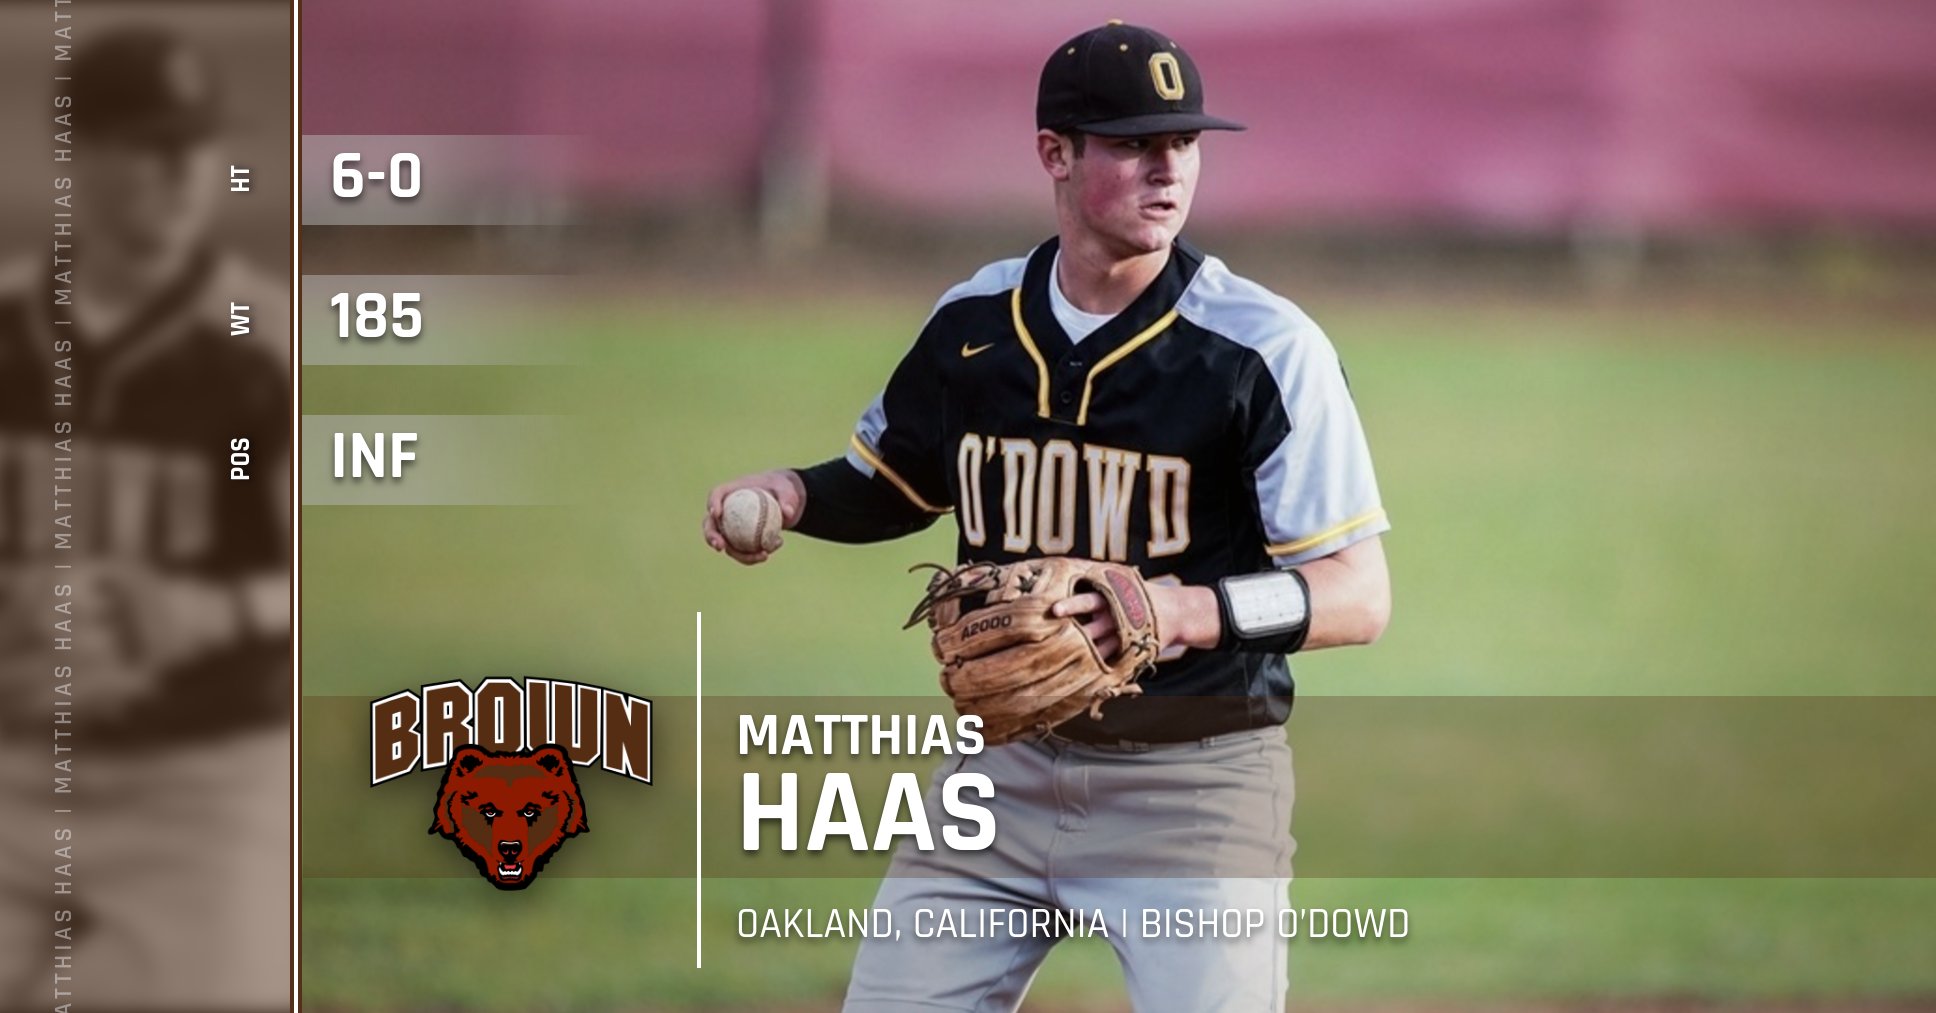 Brown Baseball on Twitter: "Welcome to Matthias Haas, a shortstop from  Oakland, California! #GoBruno https://t.co/t7LrQpmSCY" / Twitter